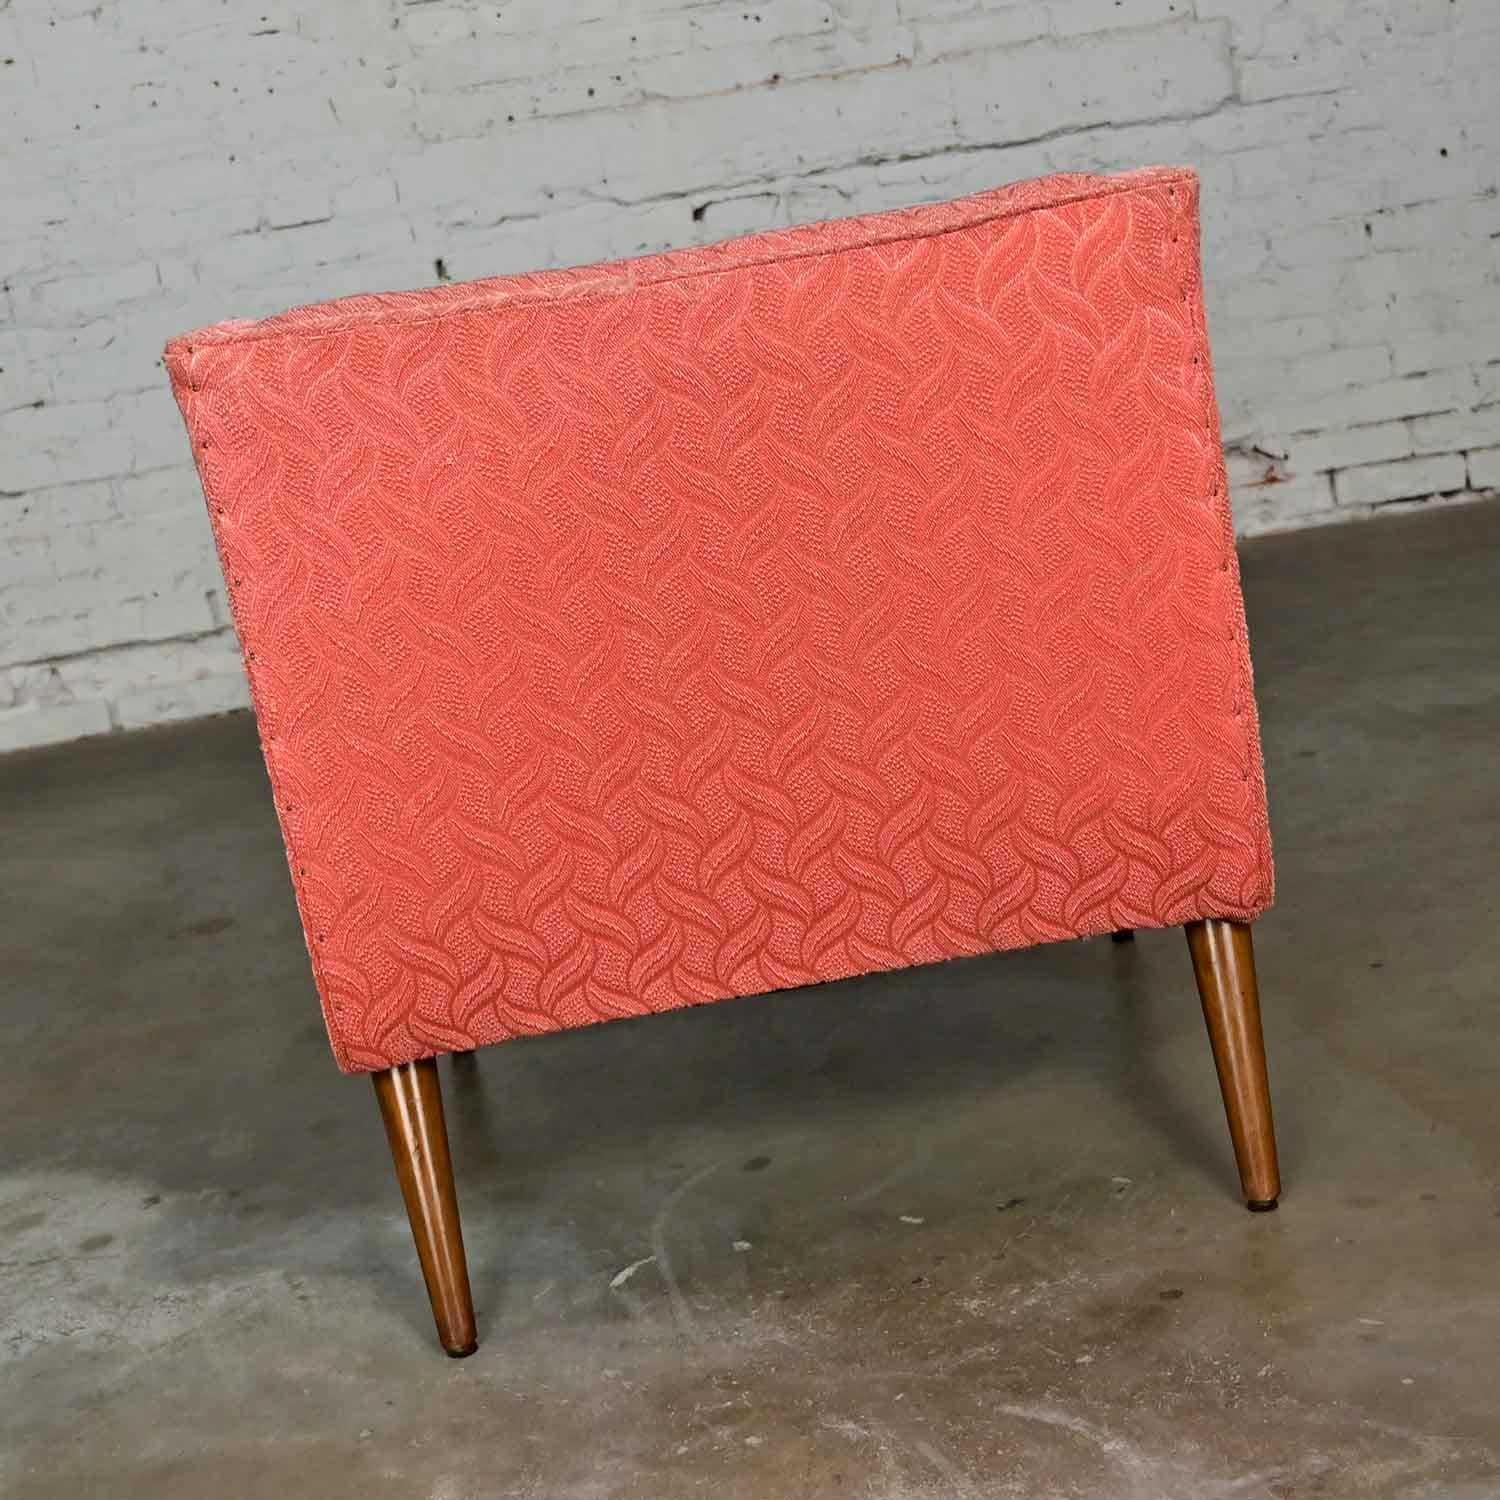 Vintage Mid-Century Modern Coral Frieze Upholstered Modified Slipper Chair For Sale 2